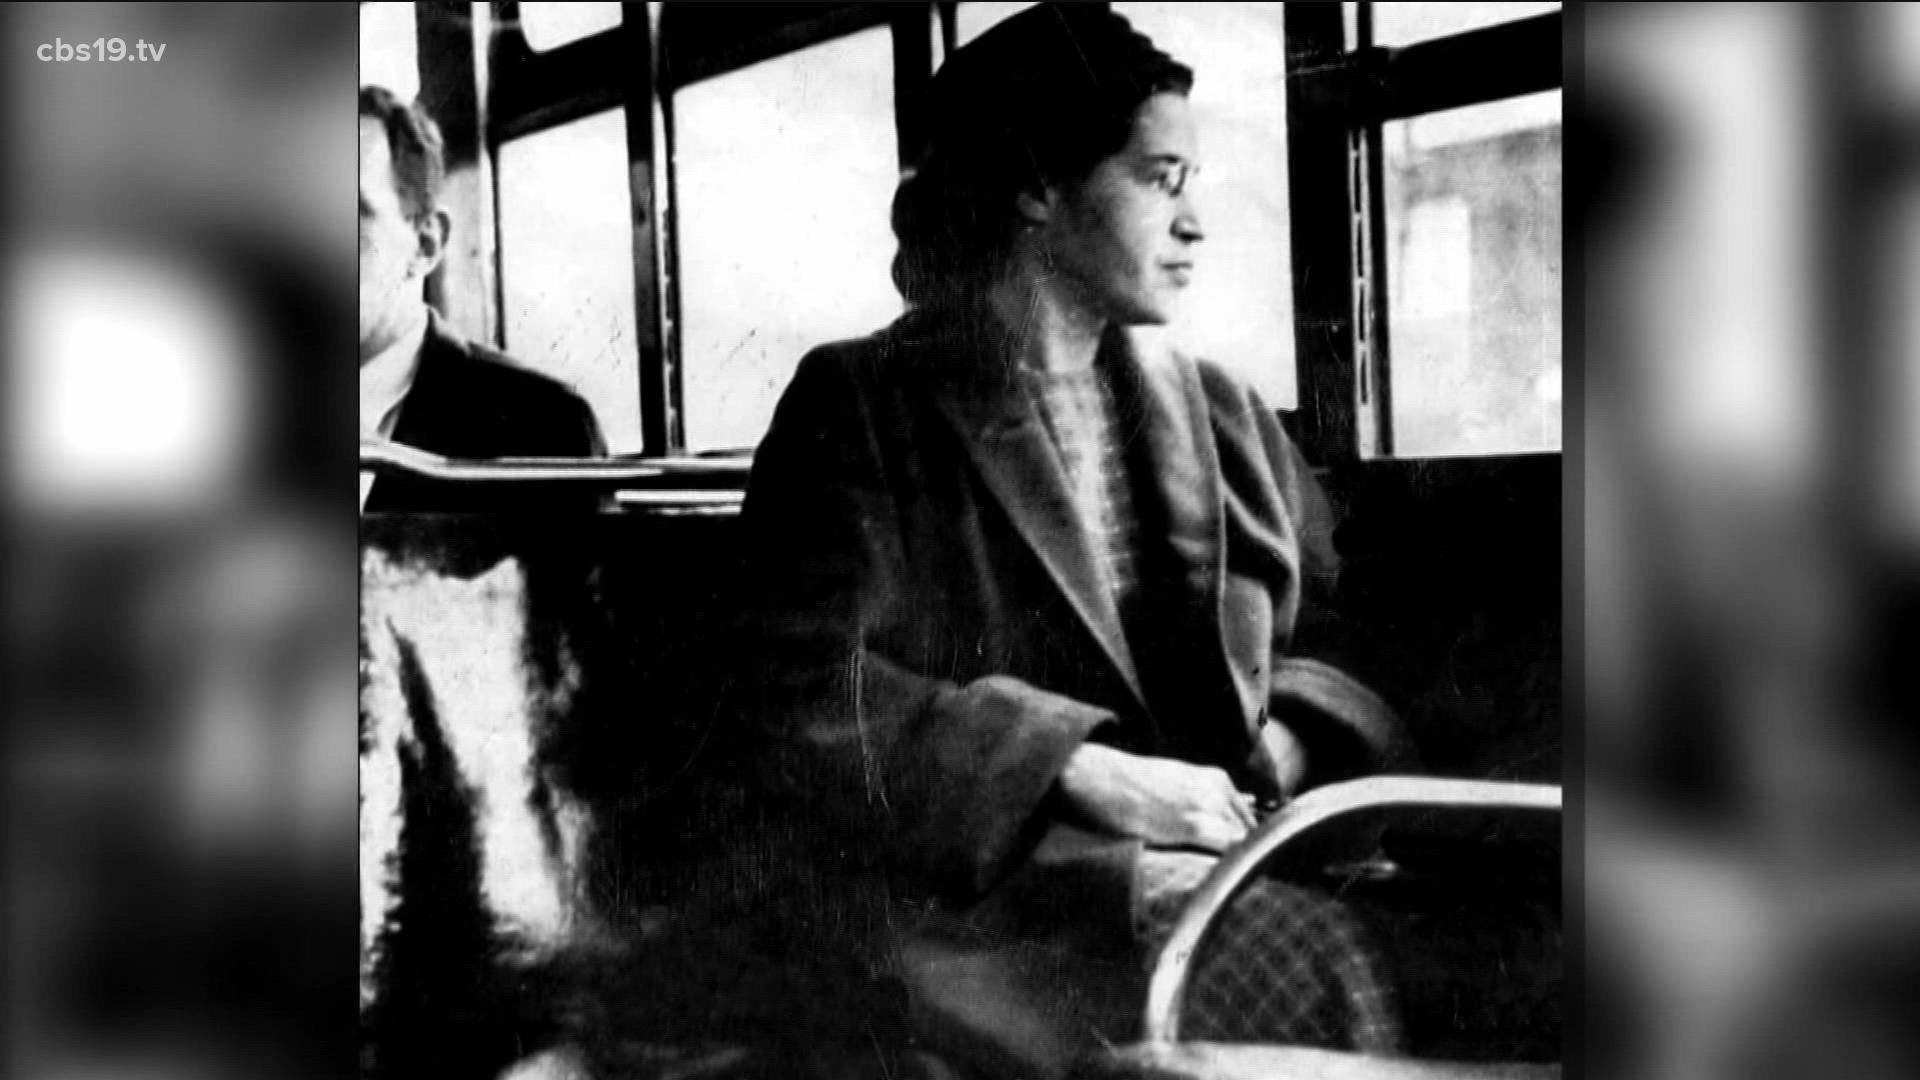 The annual event honors the civil rights activist known for refusing to give up her seat during bus segregation in the 1950s.